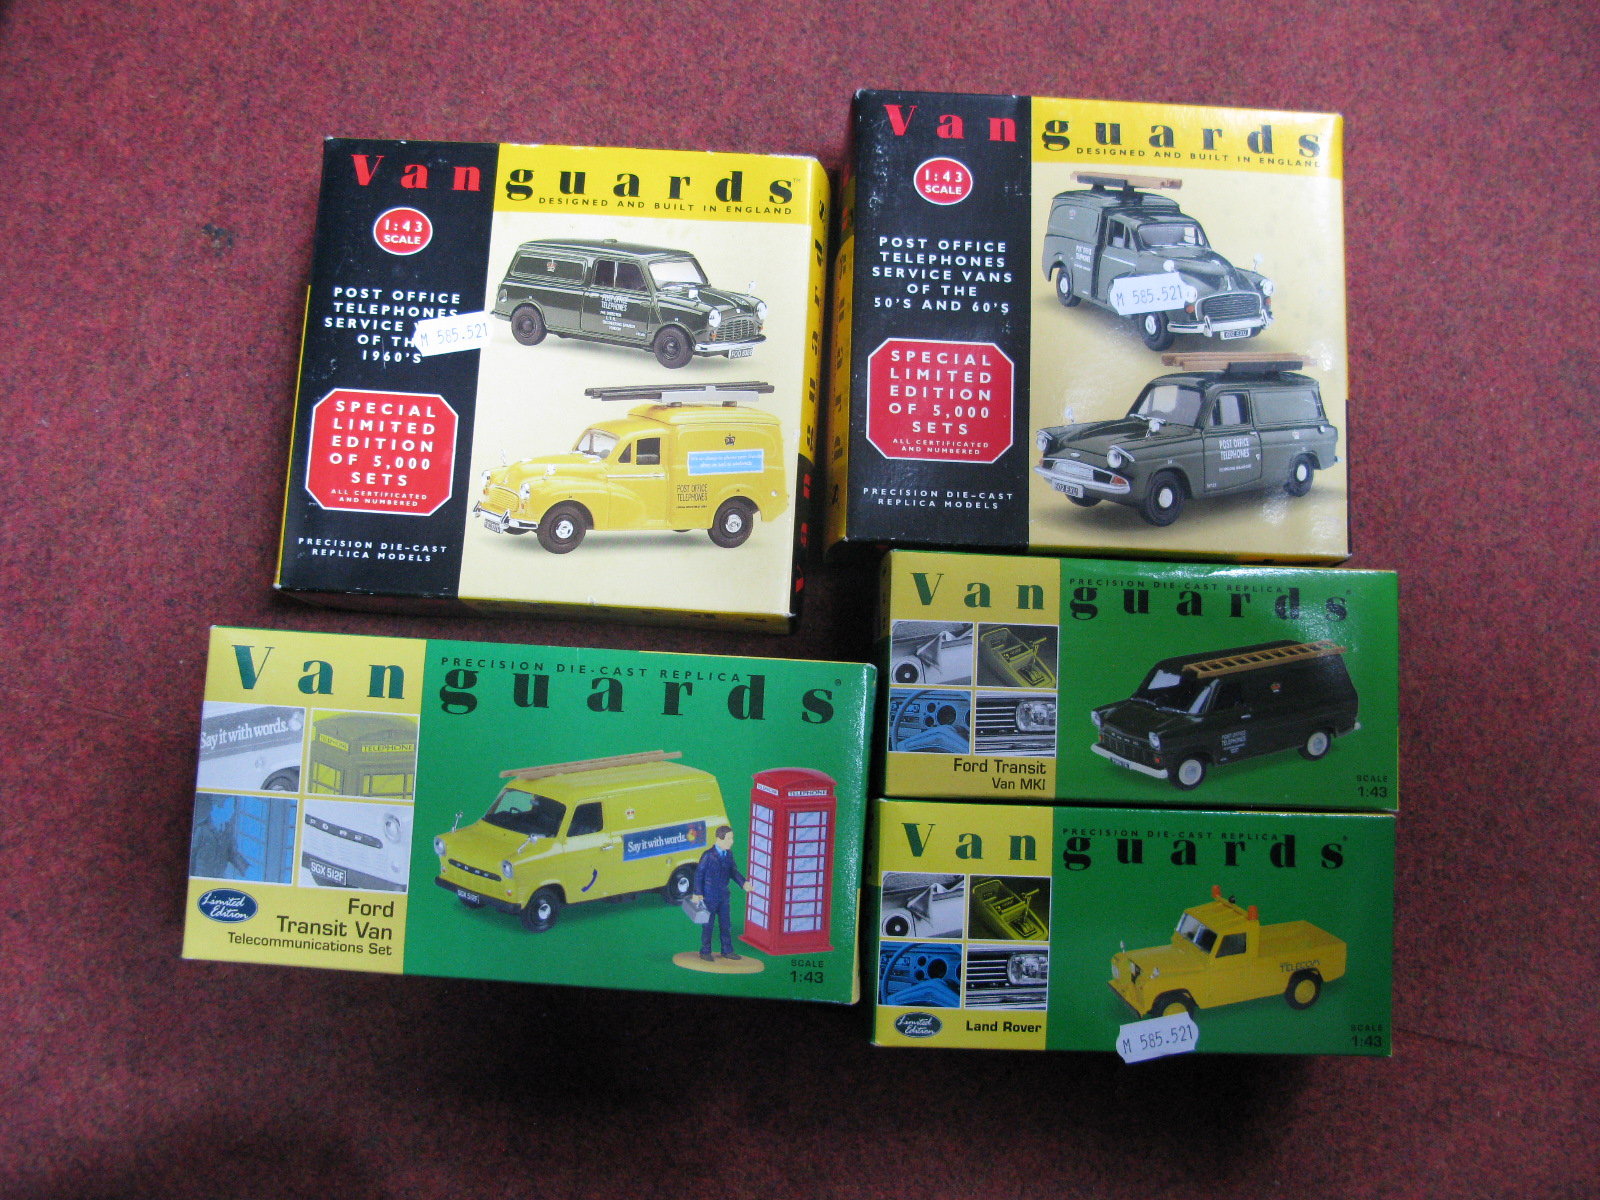 Seven Vanguards 1:43rd Scale Diecast Model Vehicles, all British Telecommunications/Post Office